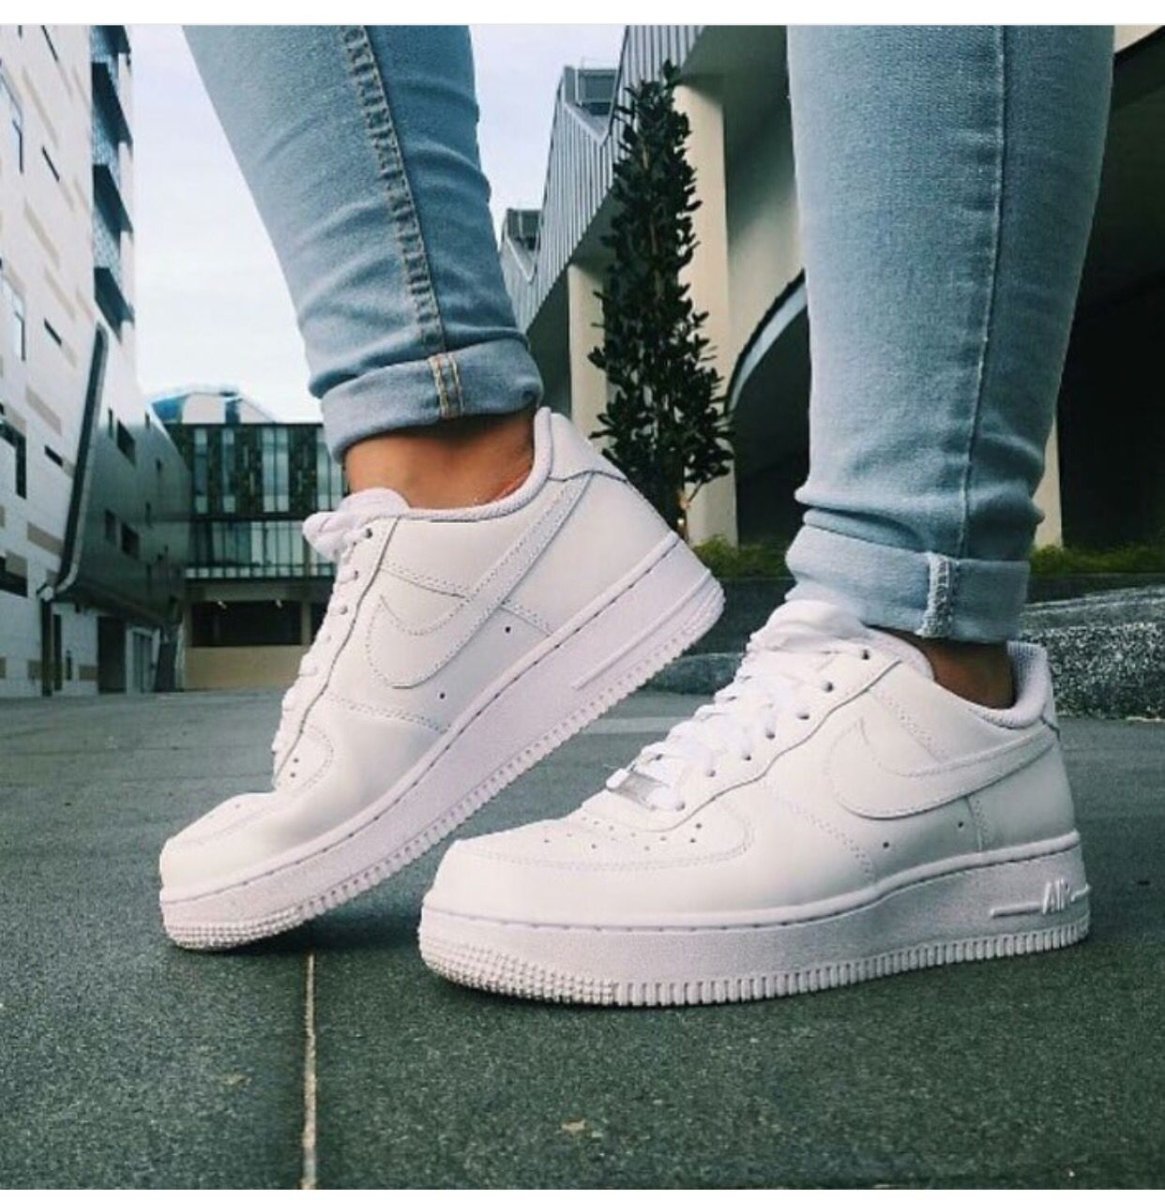 Nike Air Force 1 White outfit